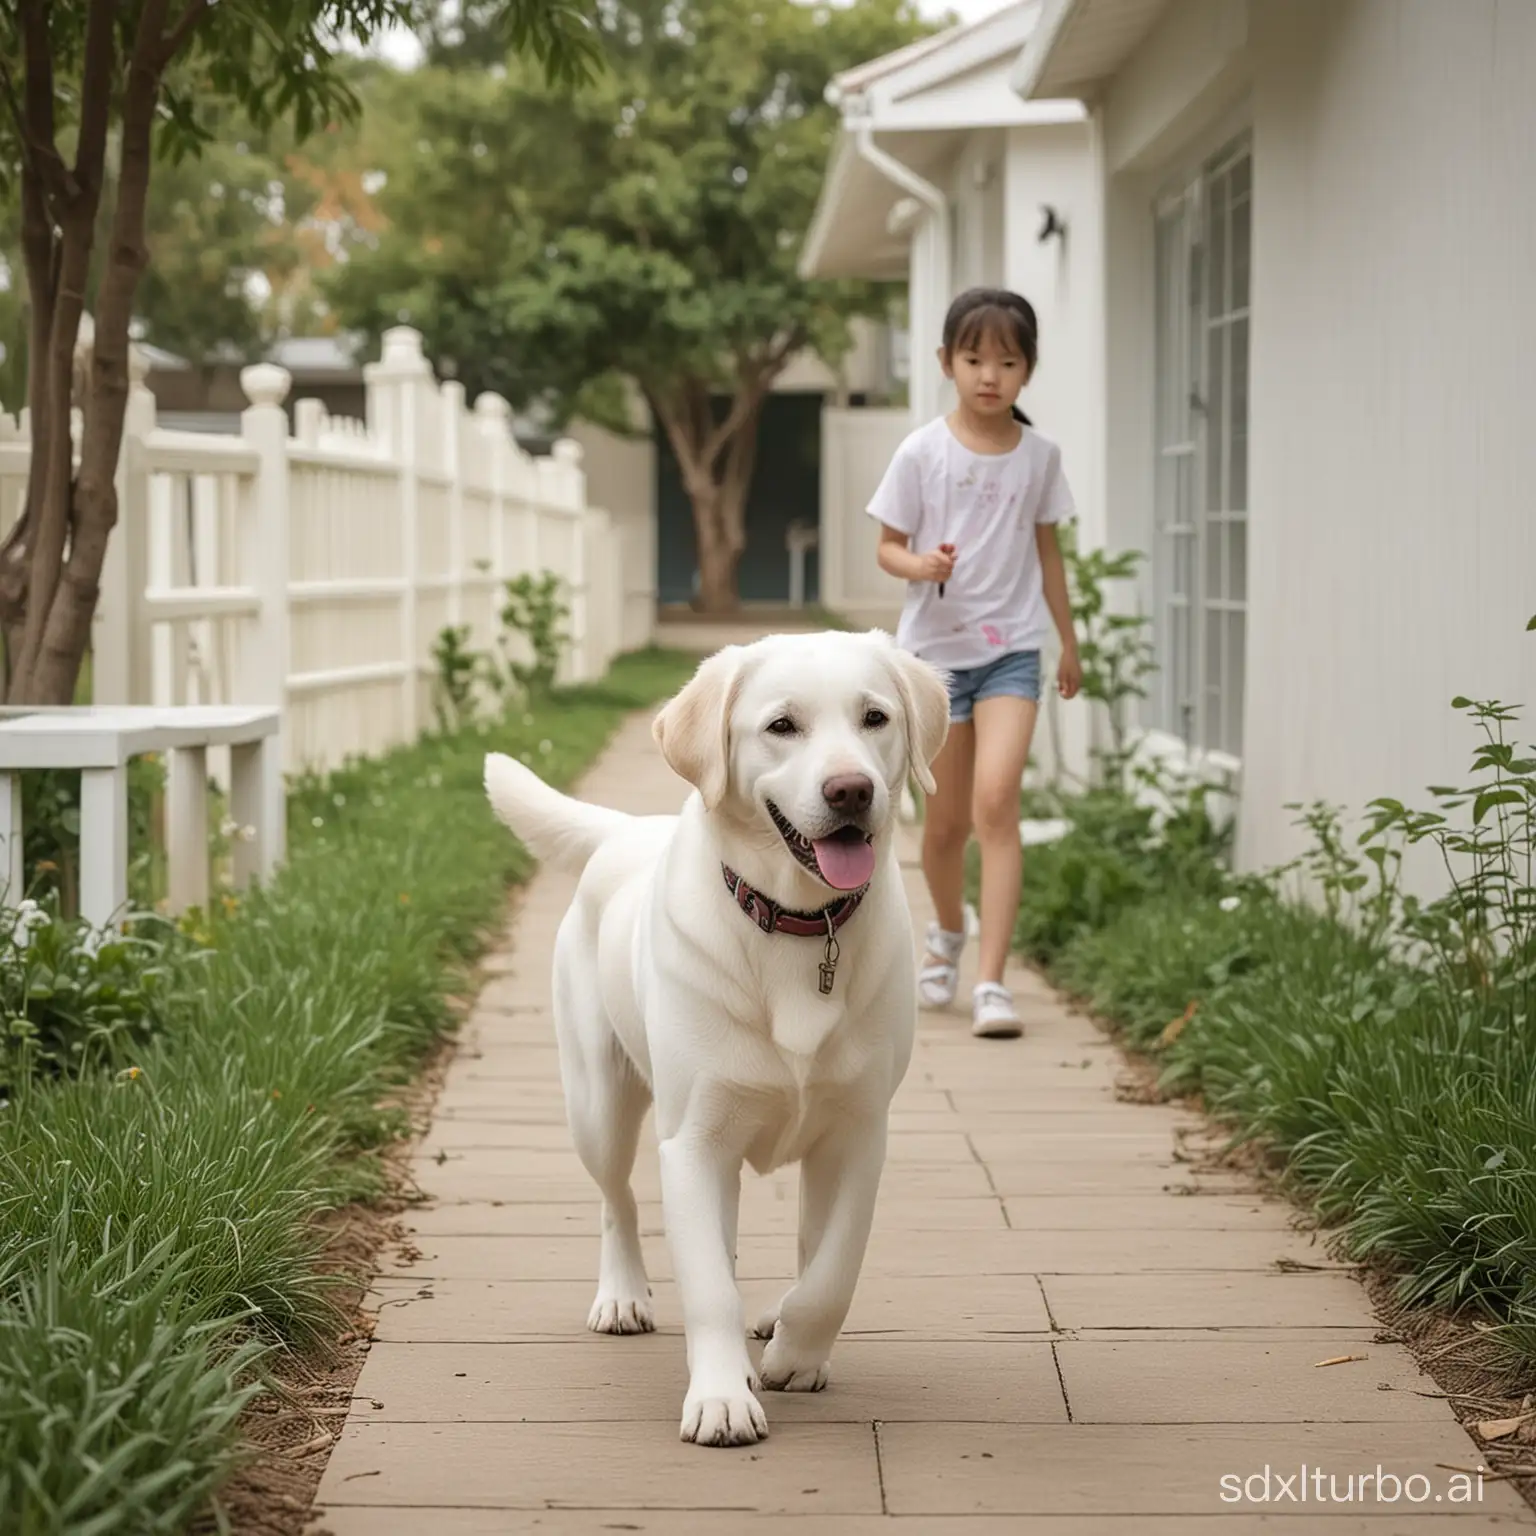 Chinese-Little-Girl-Walking-with-White-Labrador-Retriever-in-Yard